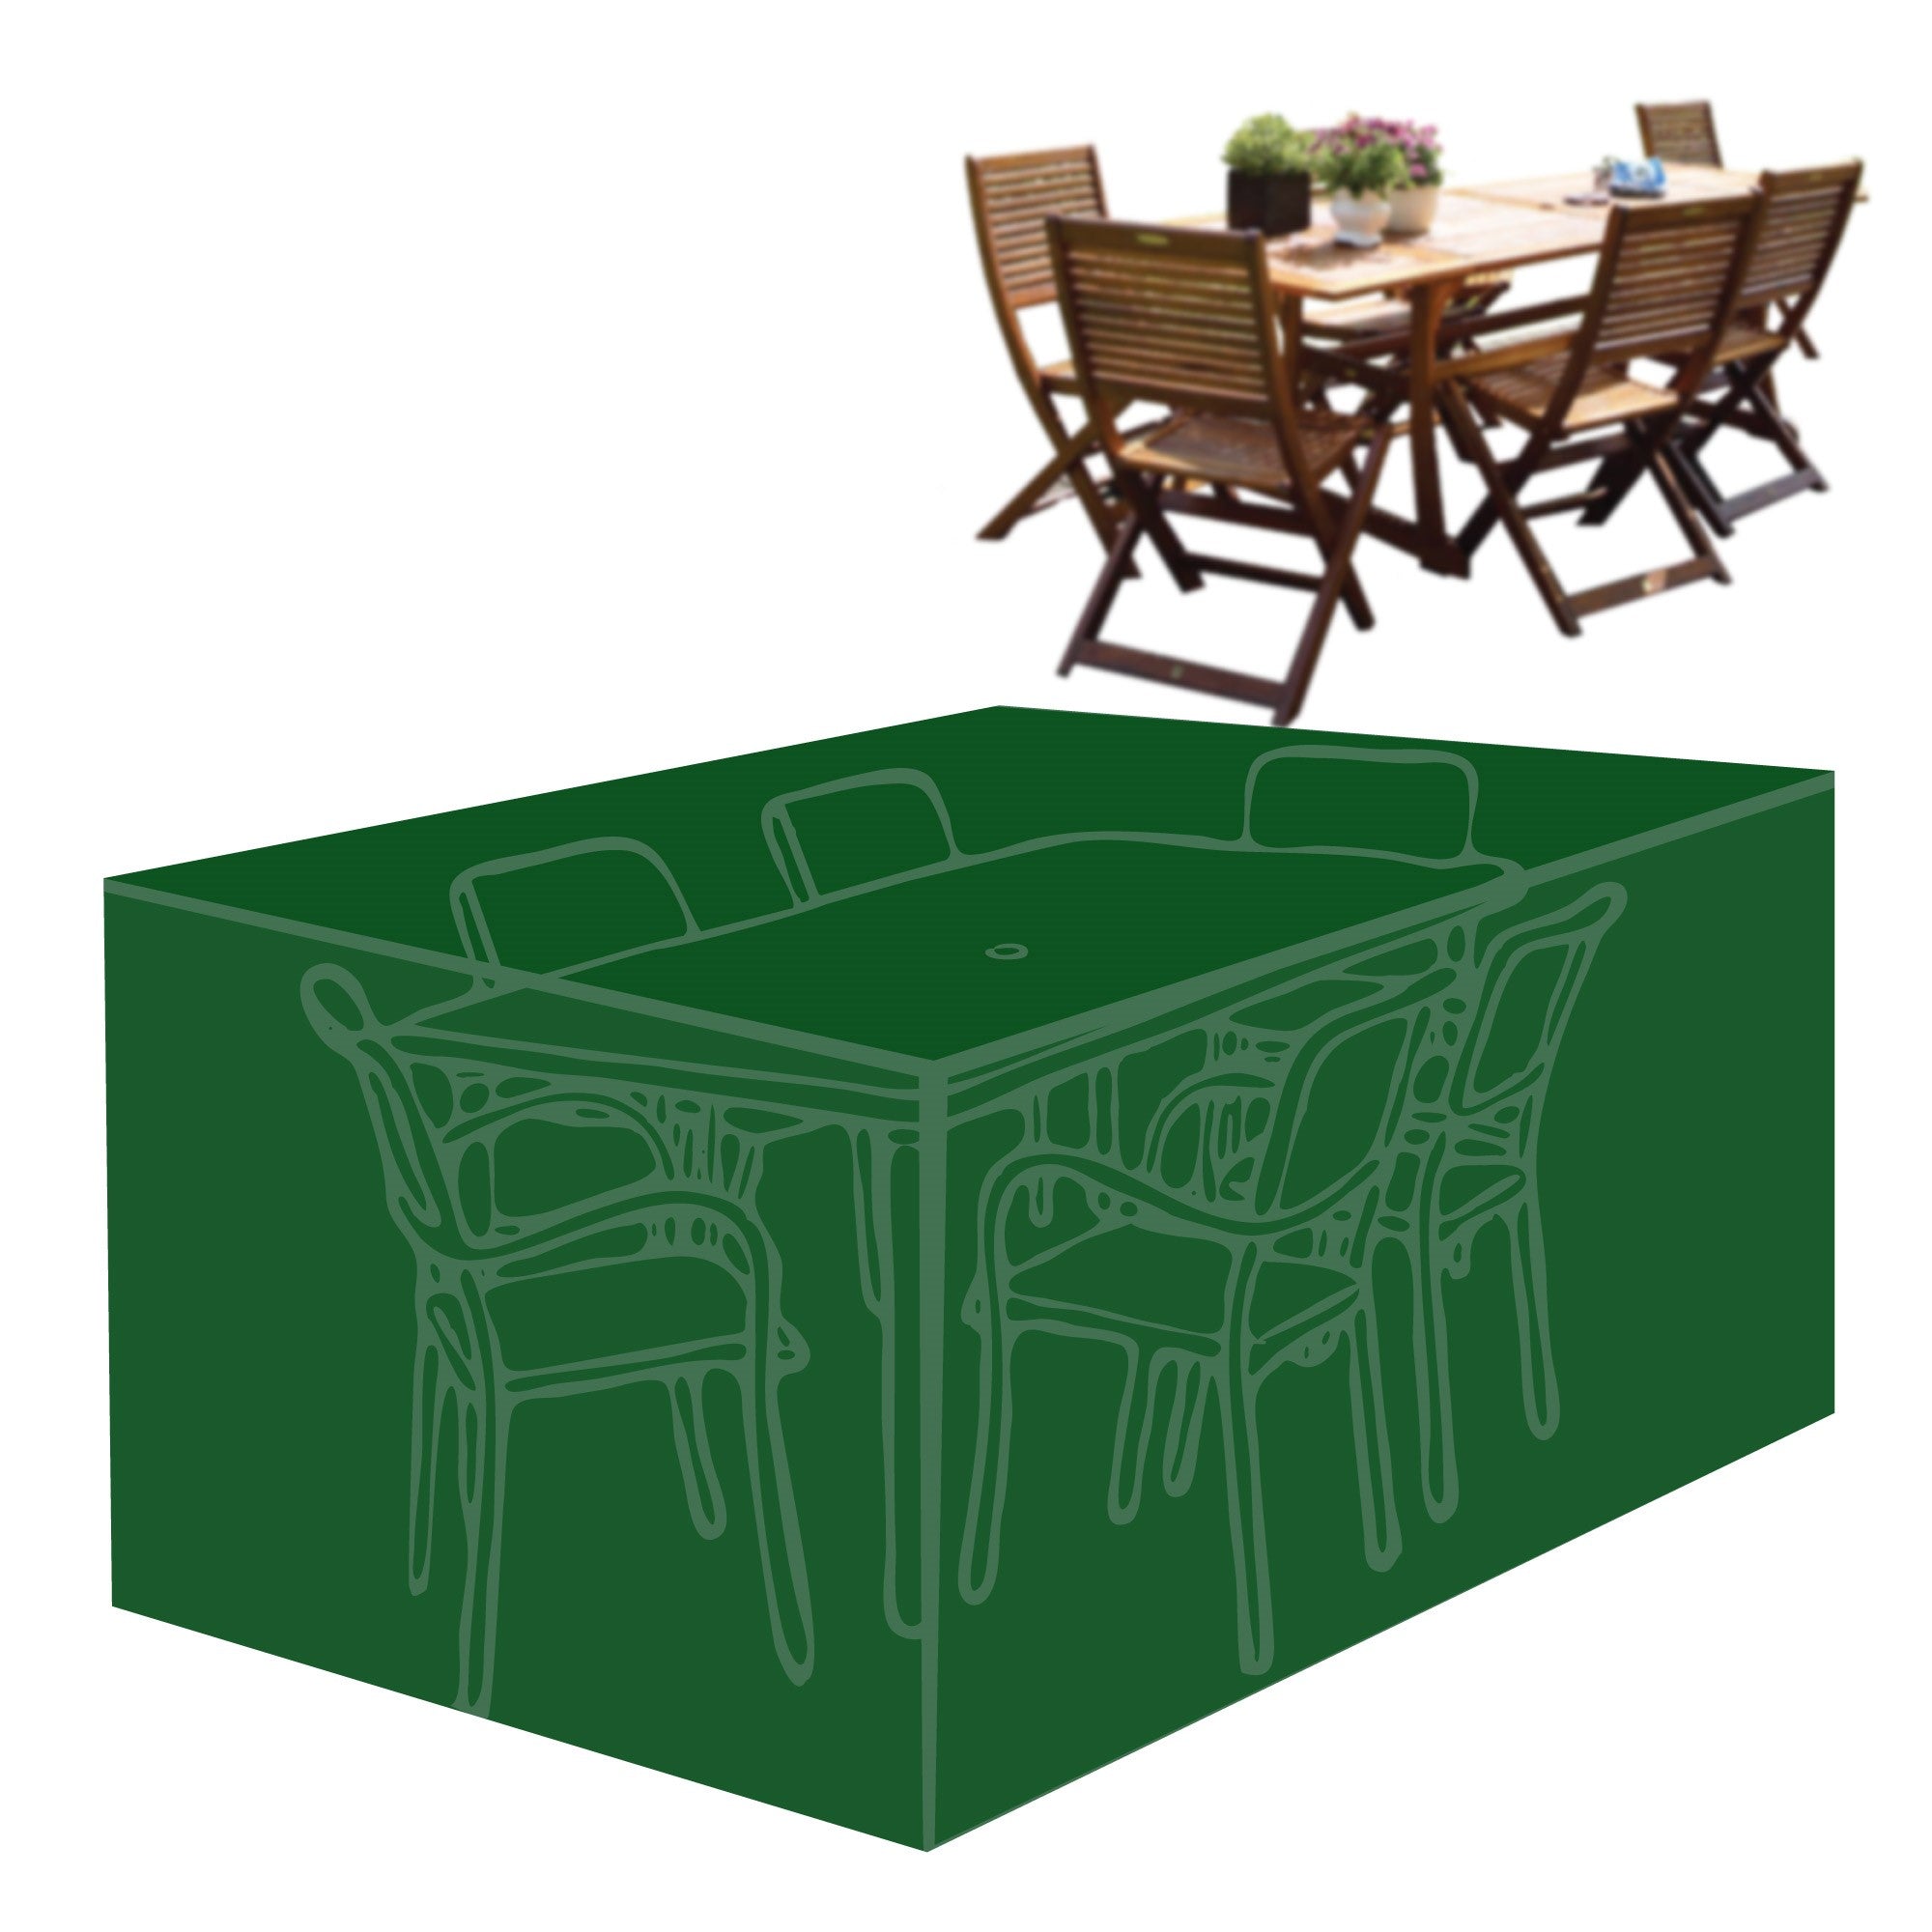 Silver & Stone Outdoor Furniture Cover for 6 Seater Rectangle 270 x 186 x 89cm Green  | TJ Hughes